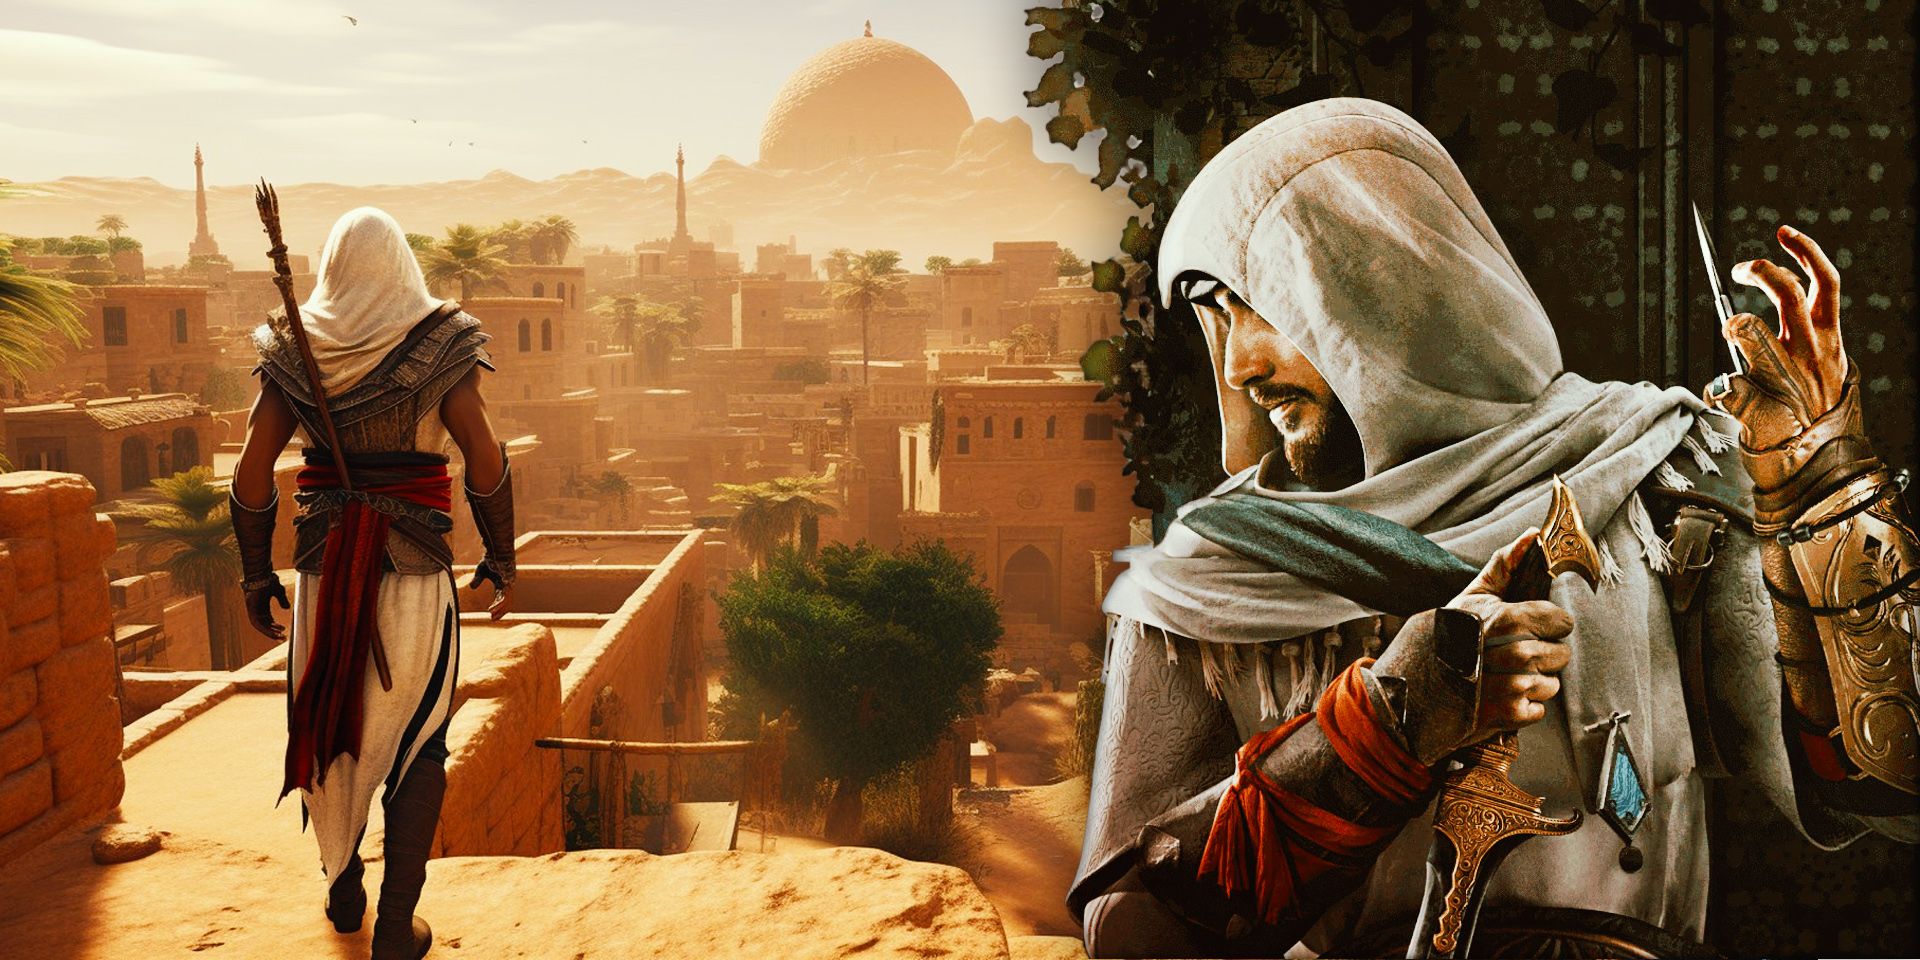 Assassin's Creed Mirage is being hailed as a welcome return to form